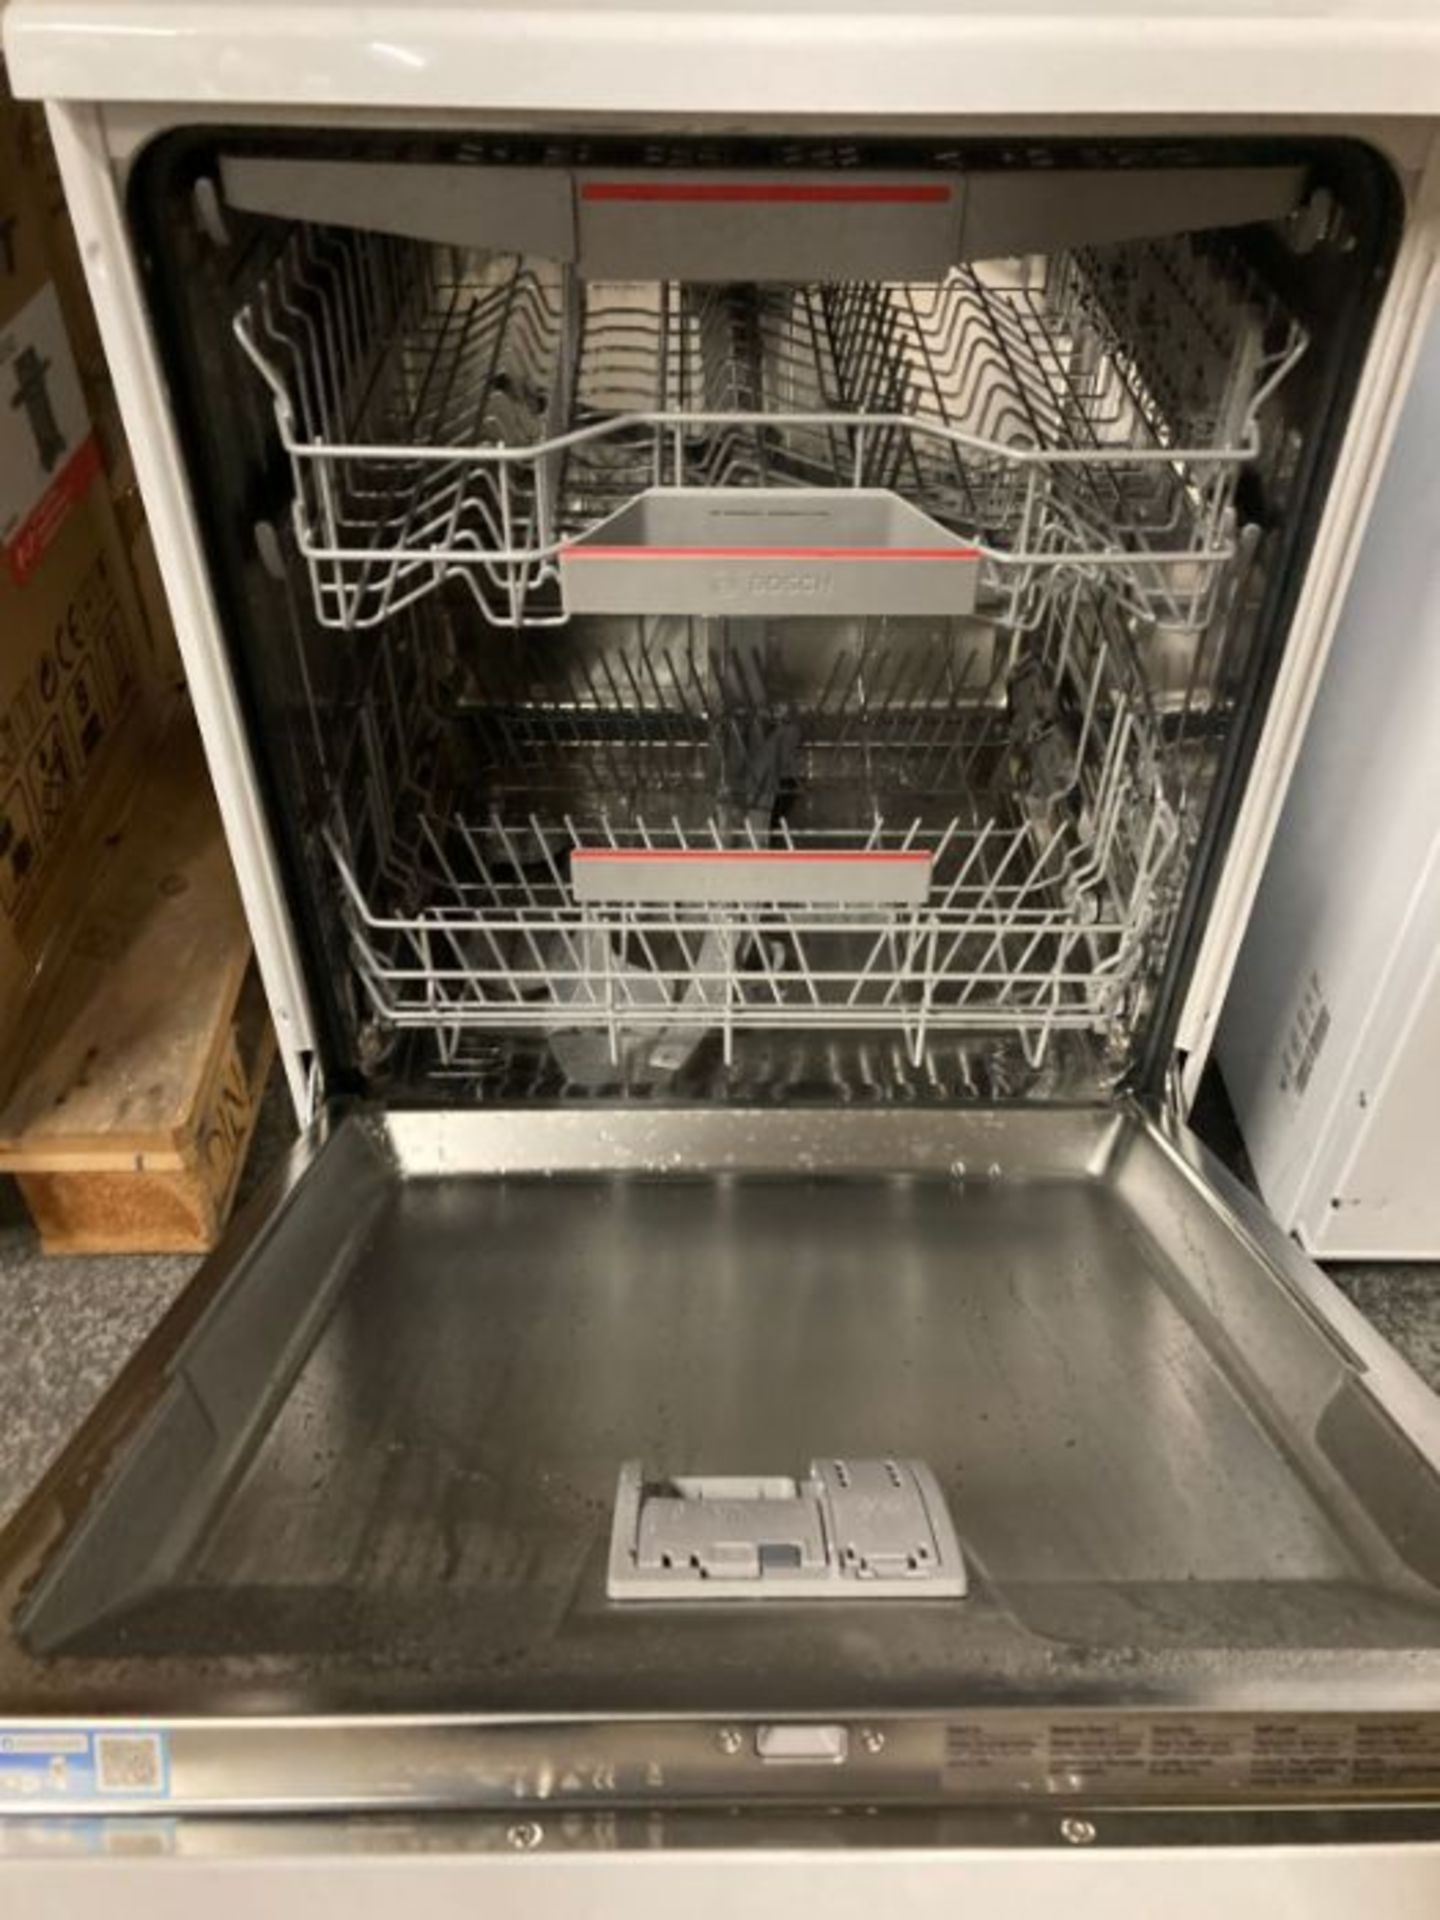 1 X BOSCH SERIE 4 SMS4HCW40G/13 FREESTANDING DISHWASHER, WHITE / UNTESTED CUSTOMER RETURN. APPEARS - Image 2 of 2